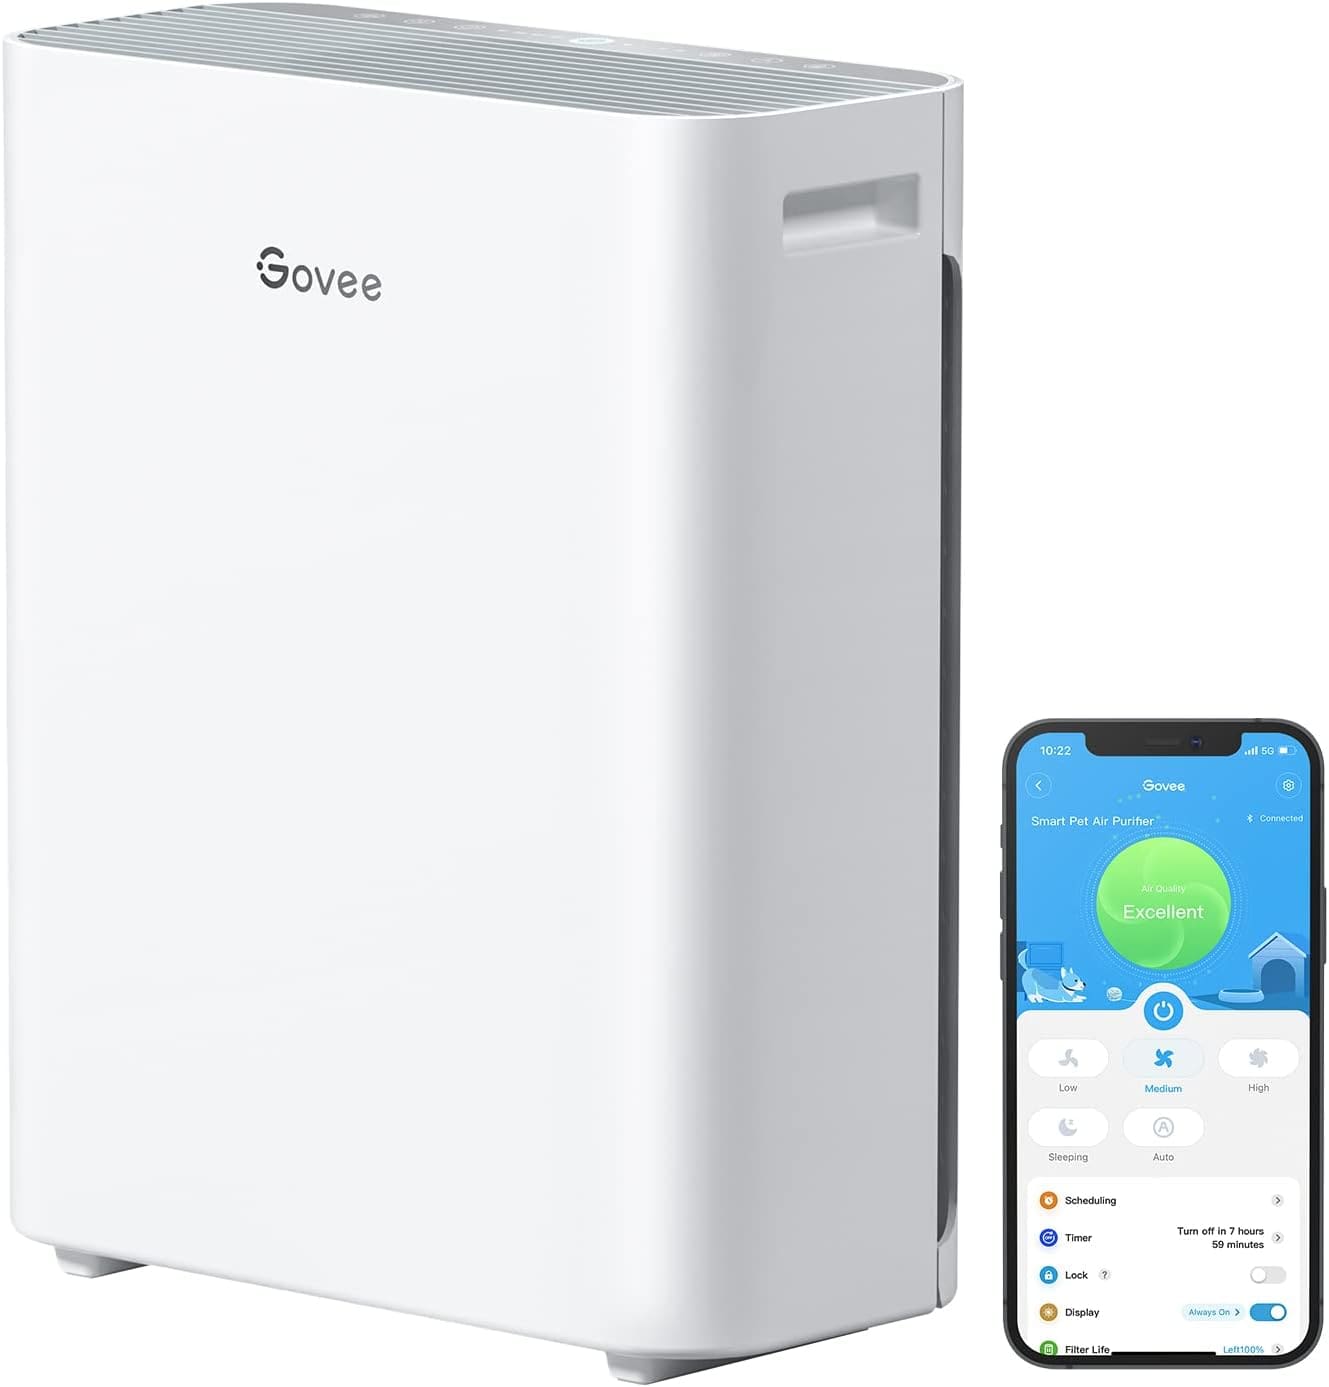 Govee Smart Air Purifier for Pets Review